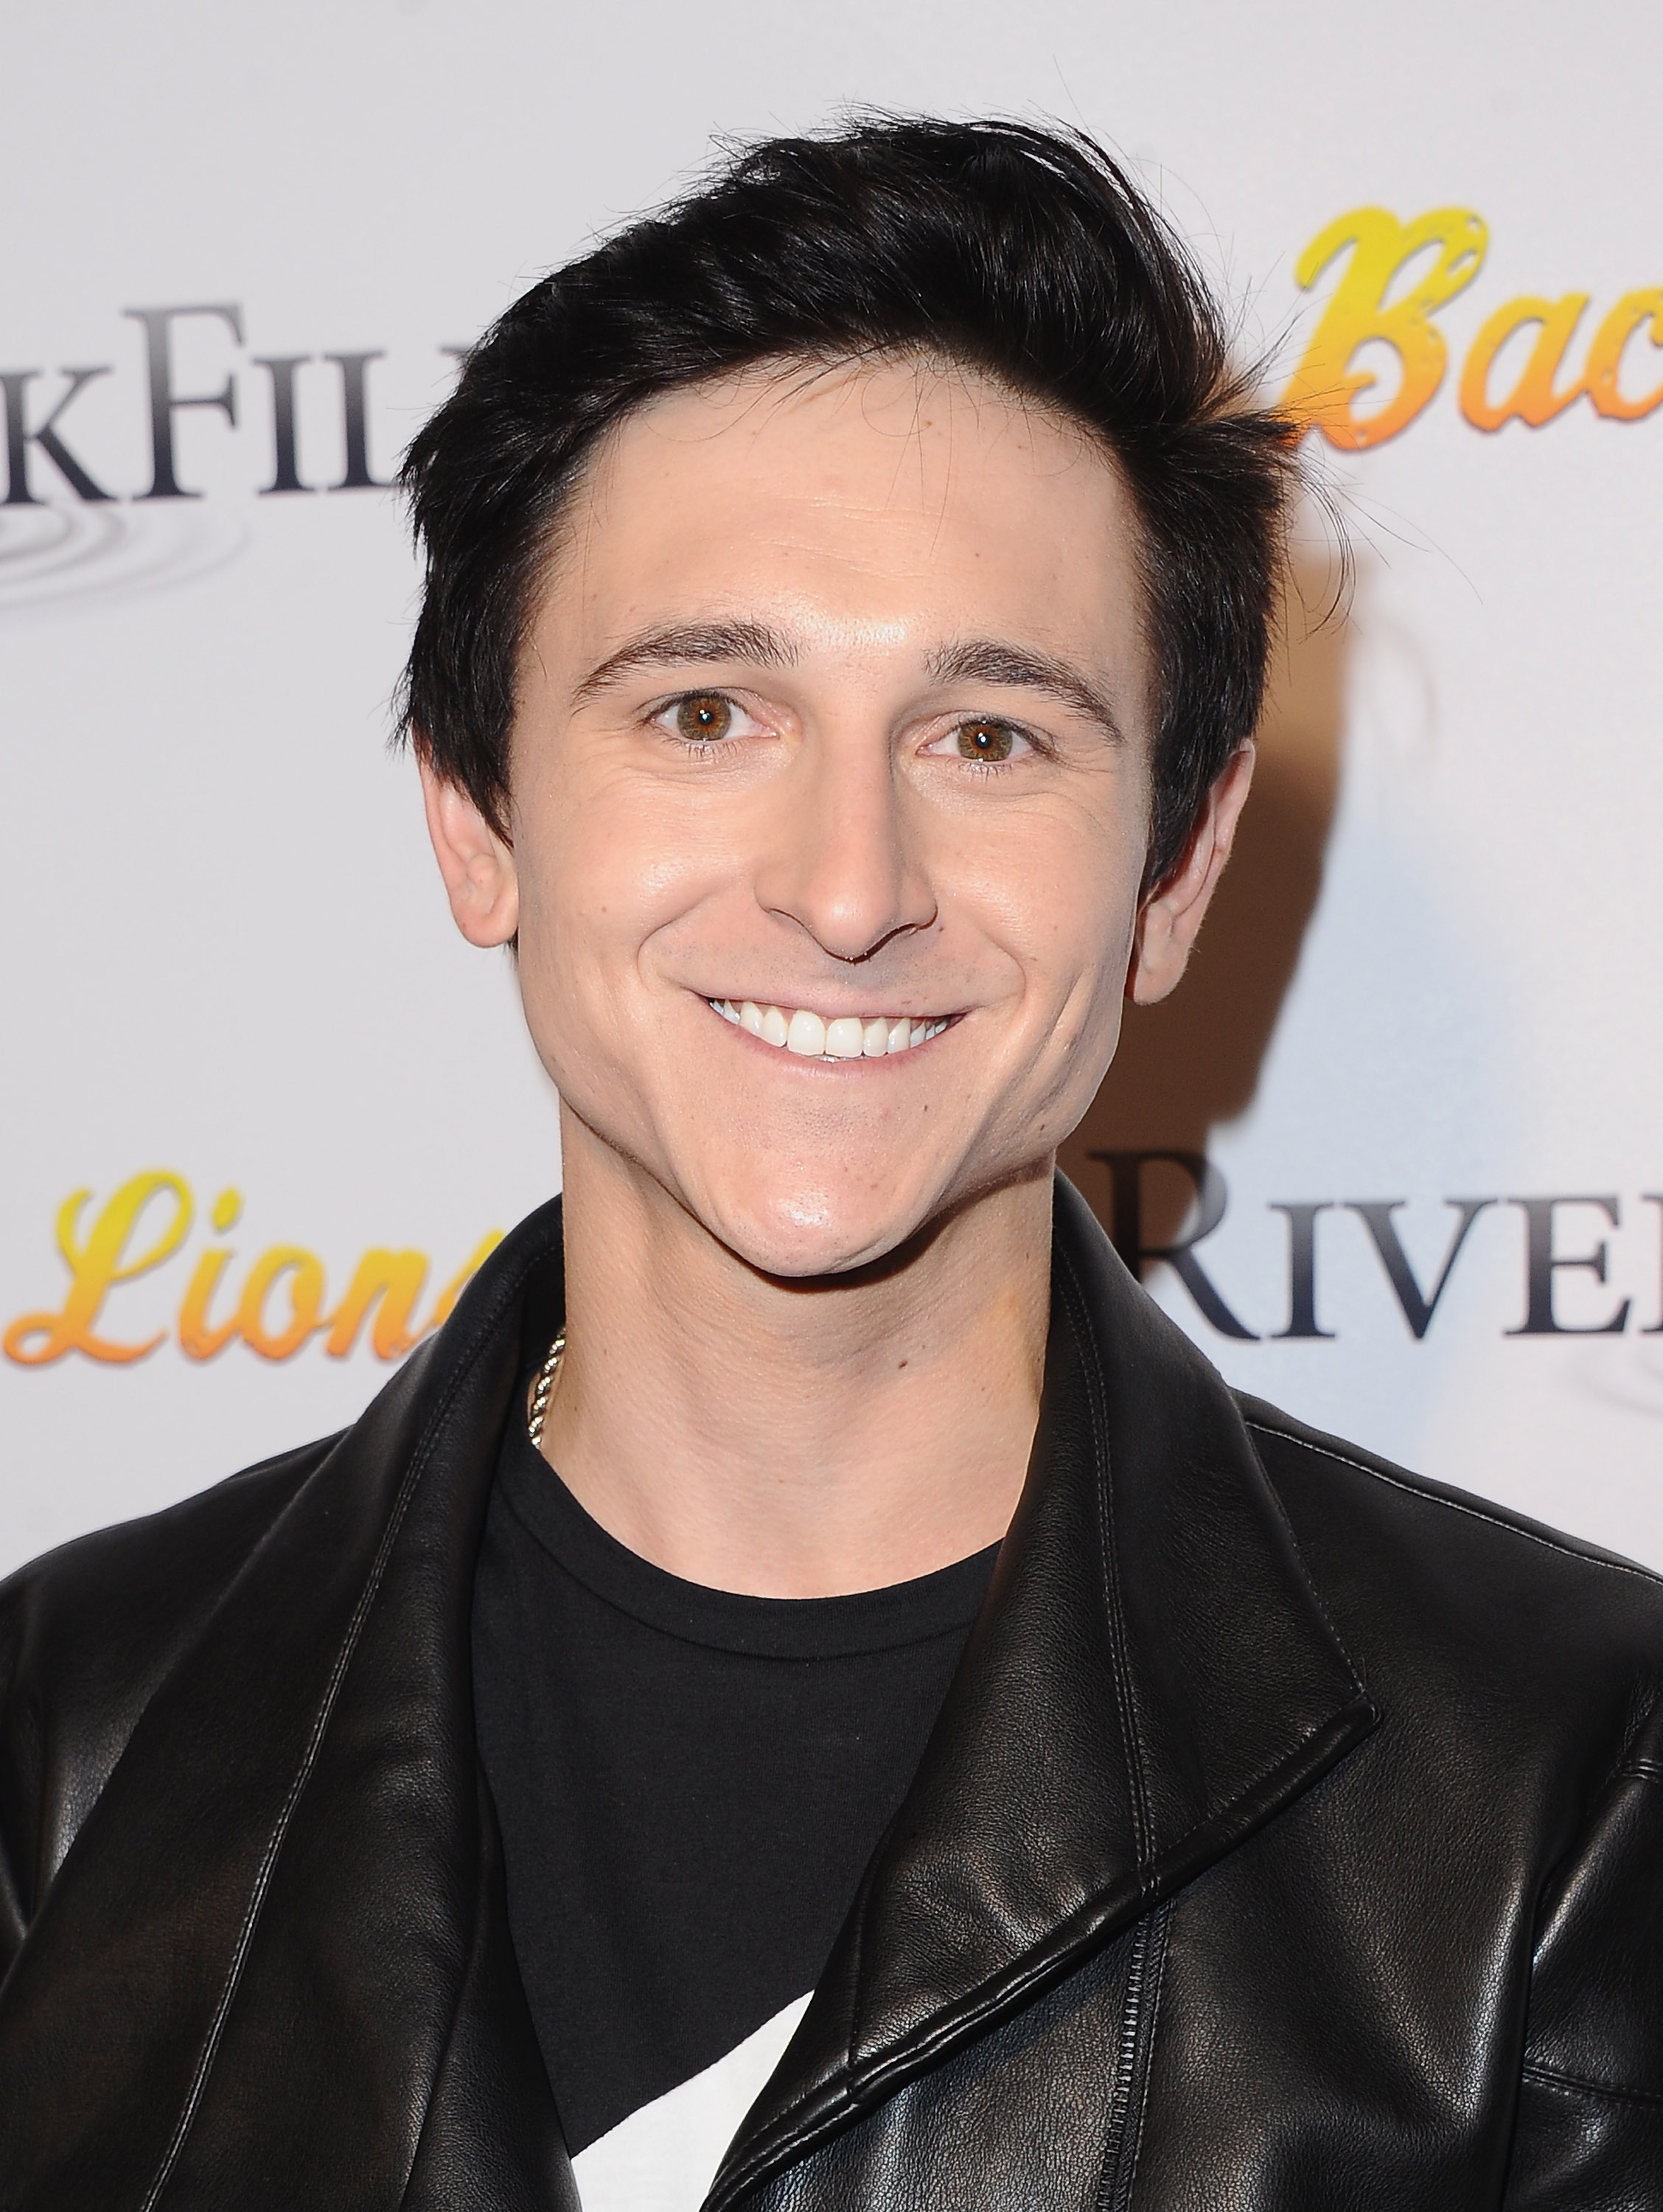 Mitchel Musso attends the Los Angeles Premiere of "Bachelor Lions" at ArcLight Hollywood on January 9, 2018, in Hollywood, California. | Source: Getty Images